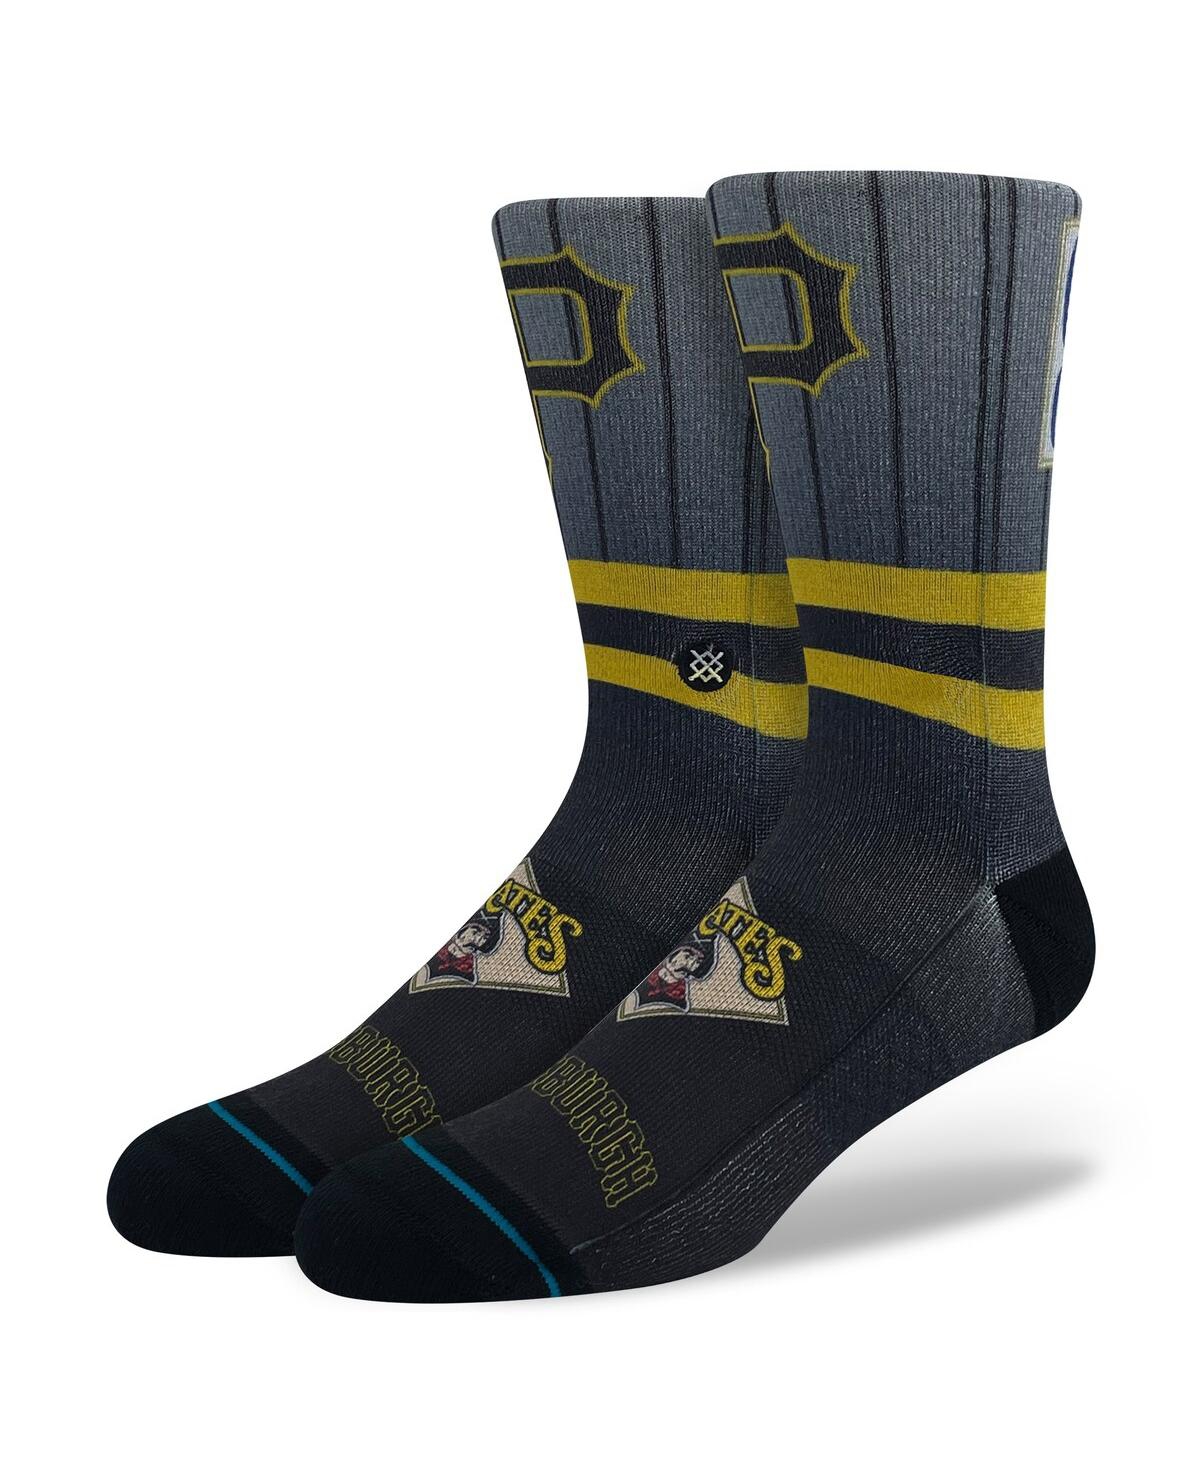 Men's Stance Pittsburgh Pirates Cooperstown Collection Crew Socks - Multi